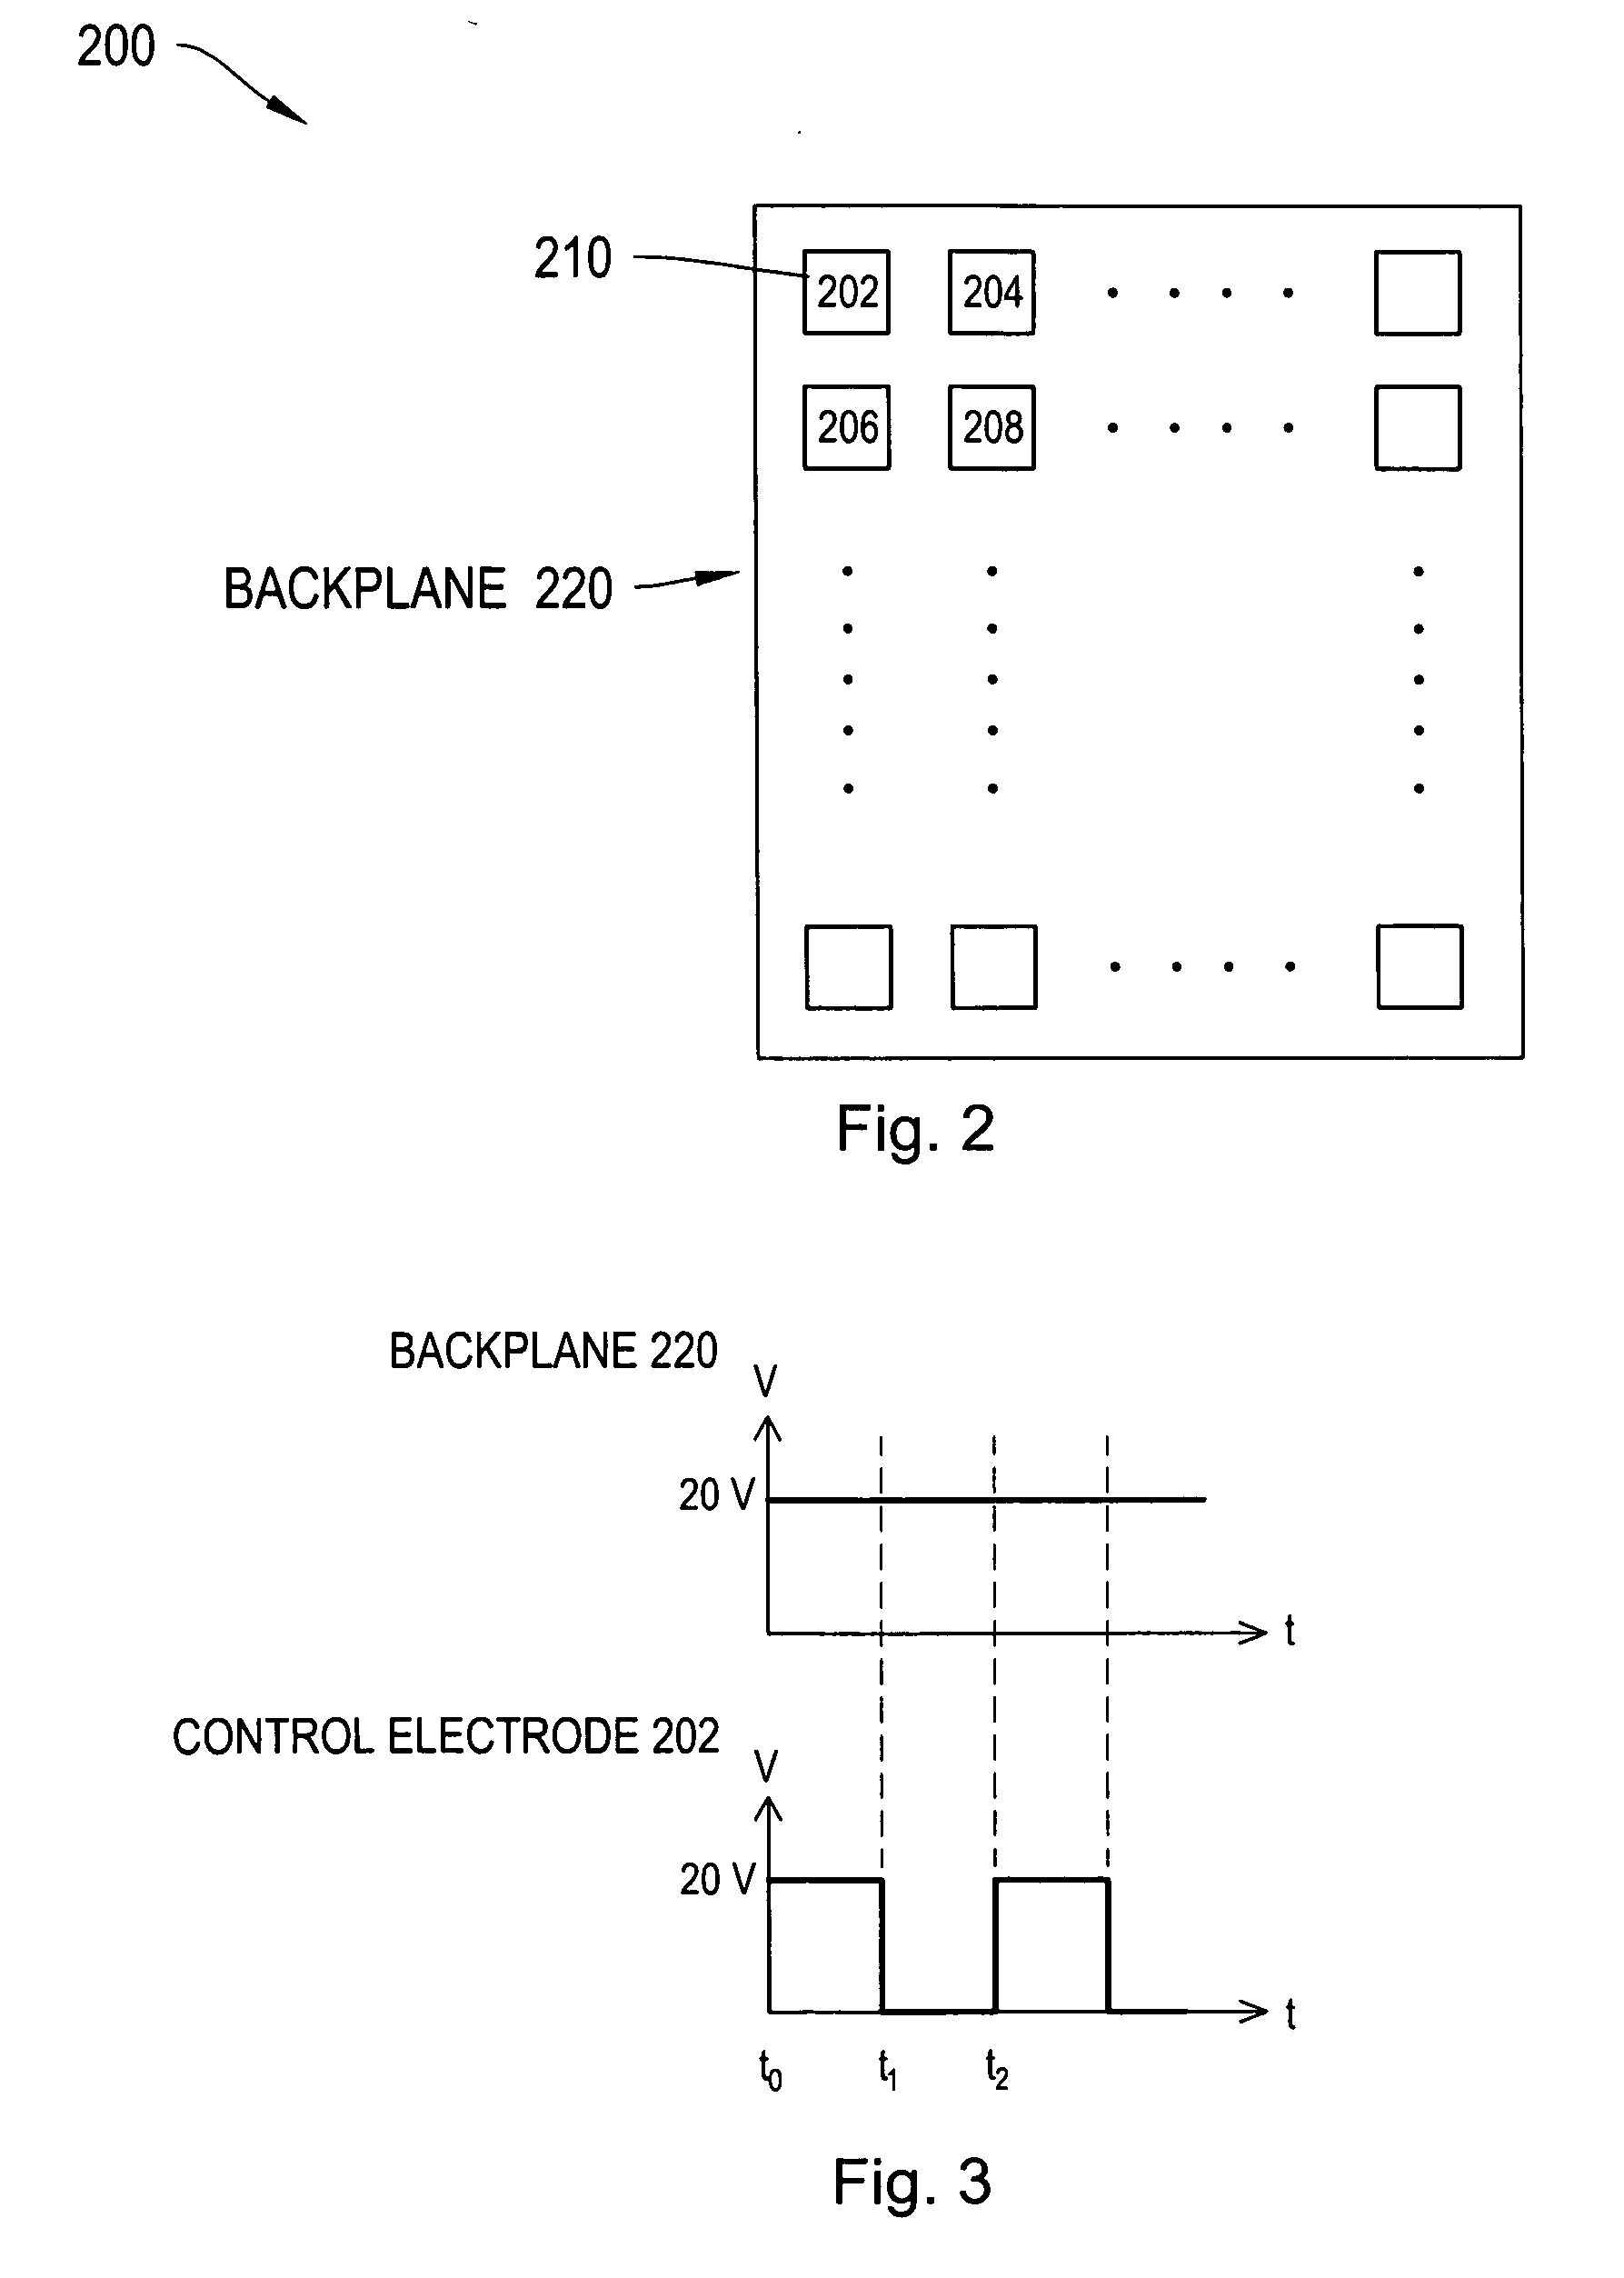 Multi-touch display screen with localized tactile feedback